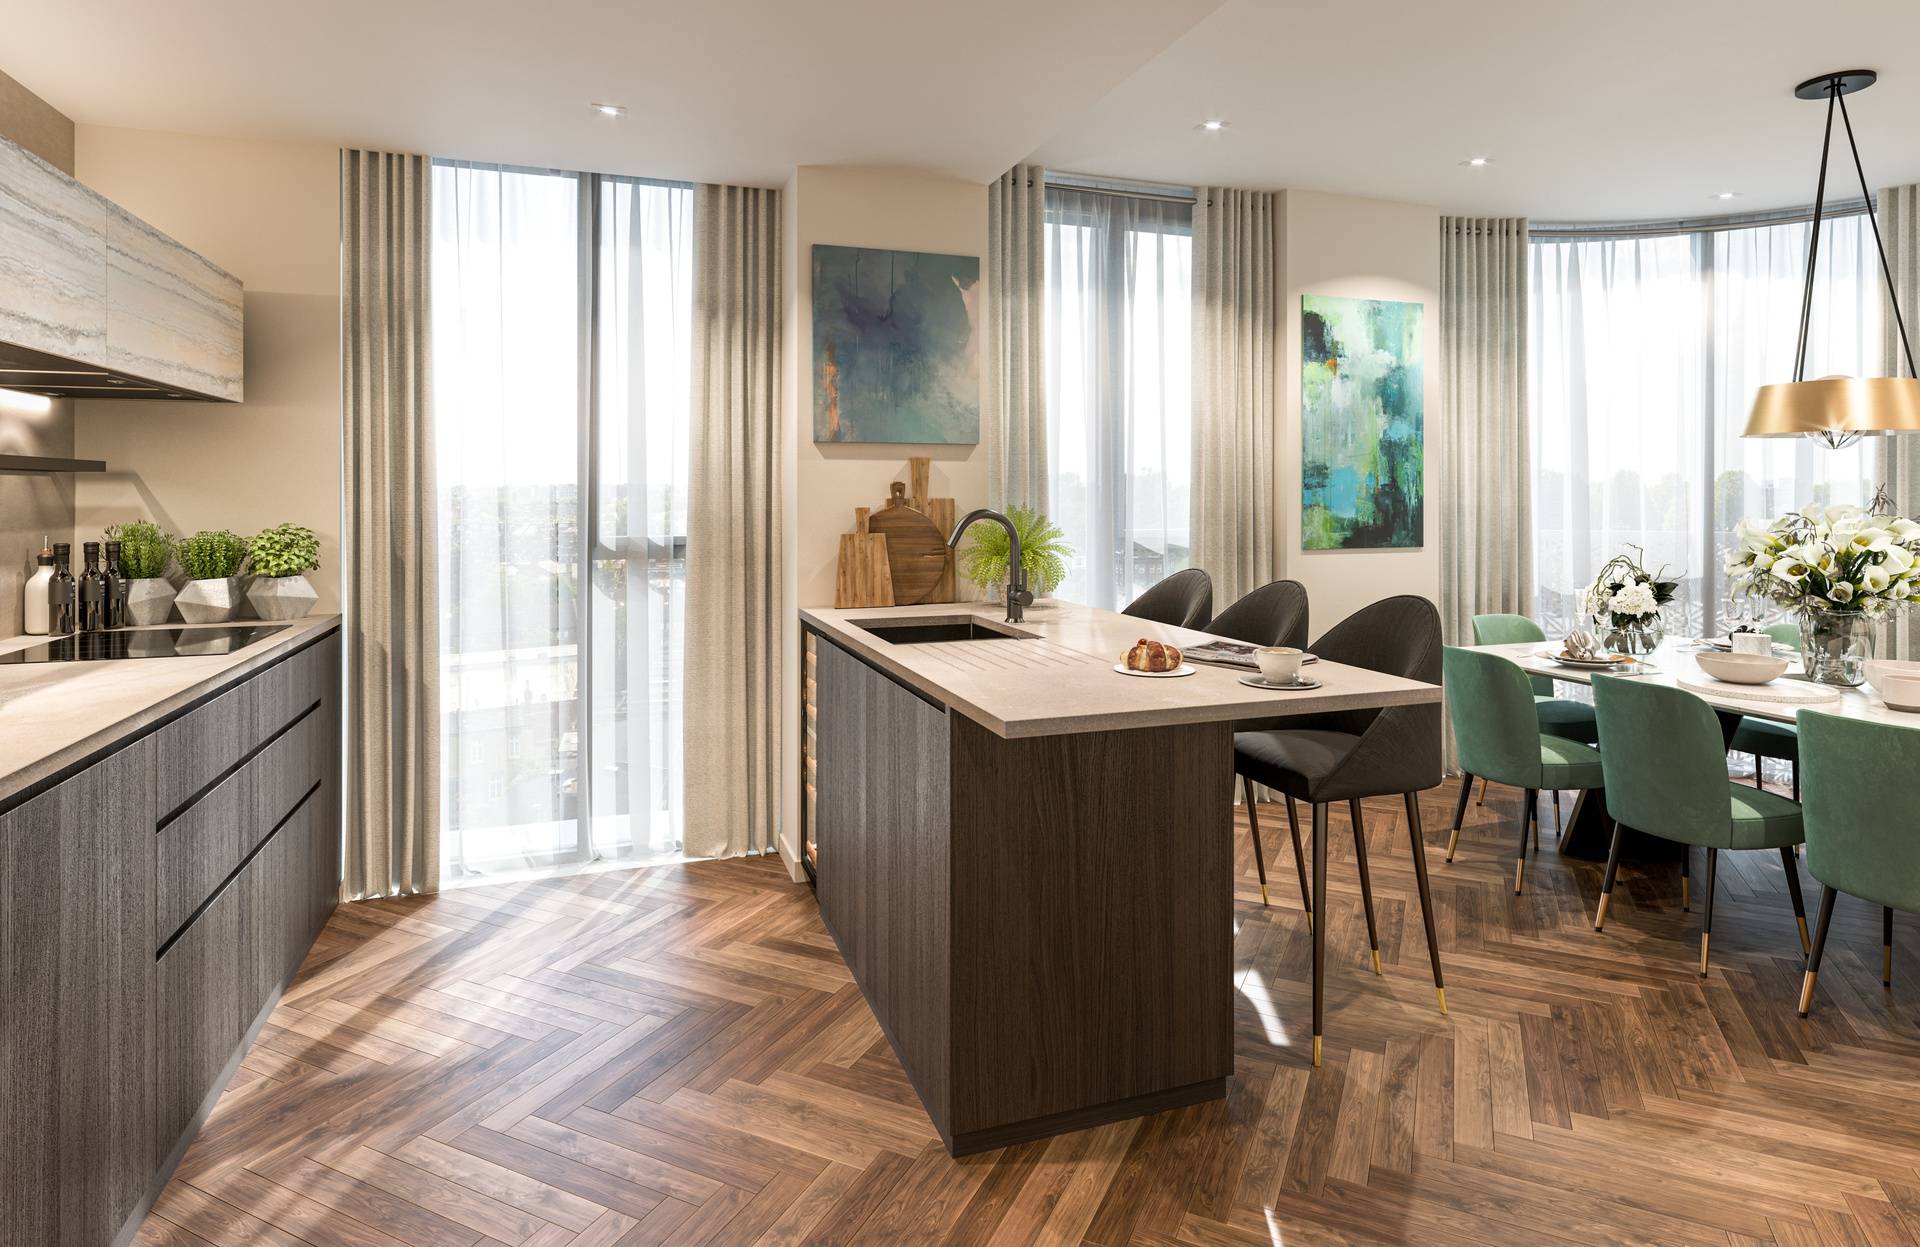 King’s Road Park's stylish collection of apartments set within six acres of beautiful landscaping including a public park, square and residents’ garden presents this spacious 2-bed 2-bath south facing apartment.